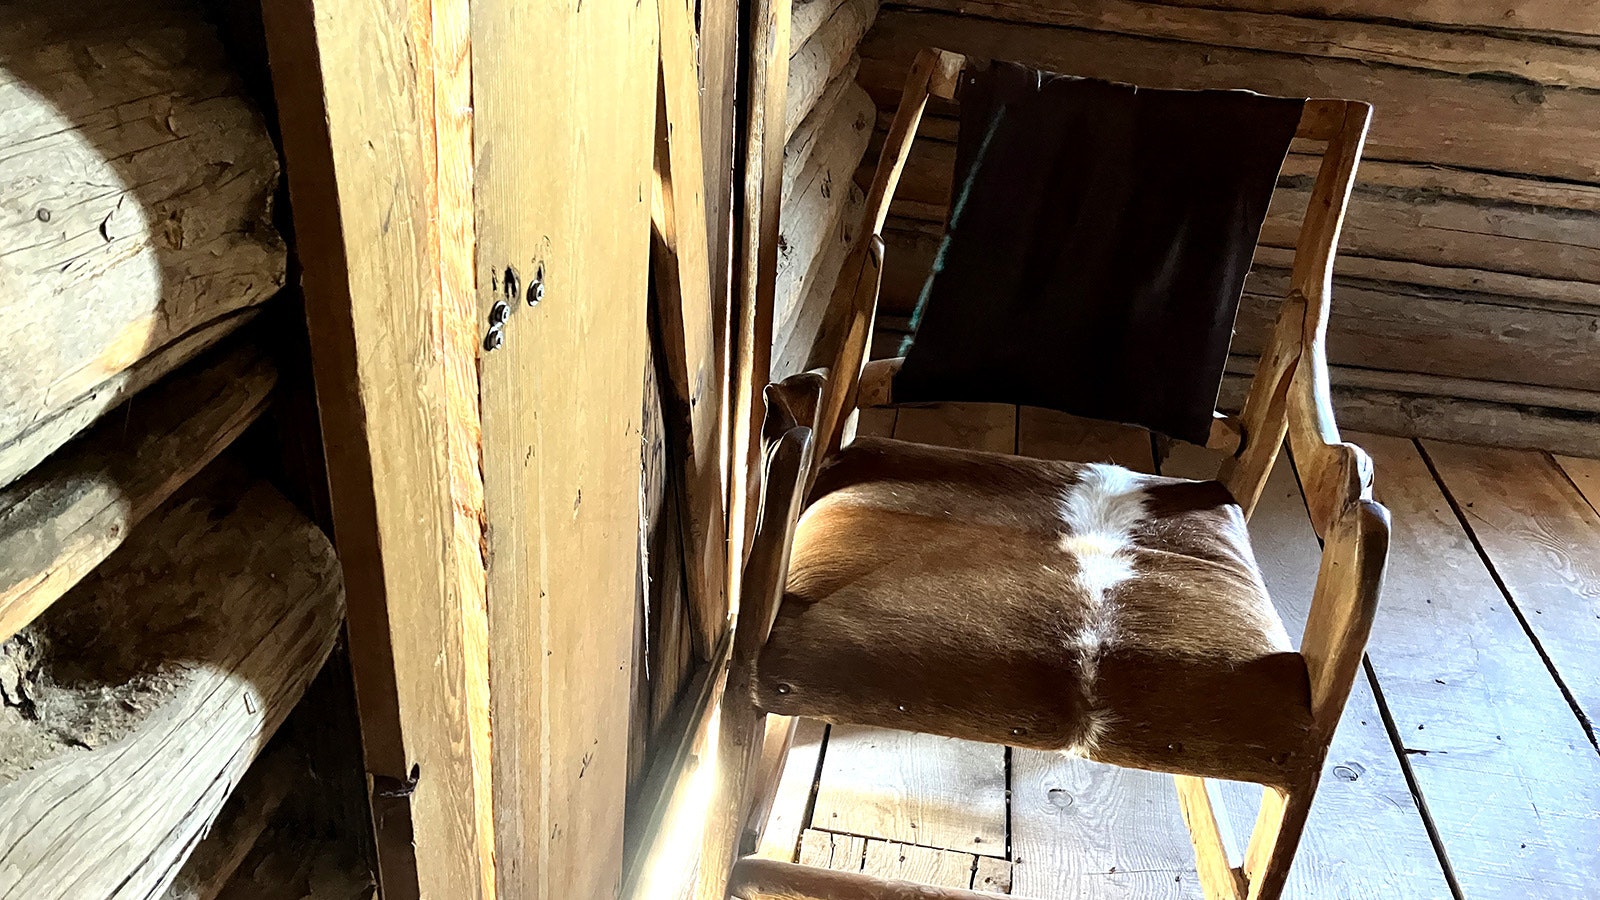 Museum Director Rick Young a few years ago found this chair blocking this door in the Sutler Store with no explanation for how it got there. The door opens in and is the only entrance. Windows are nailed shut from the inside.